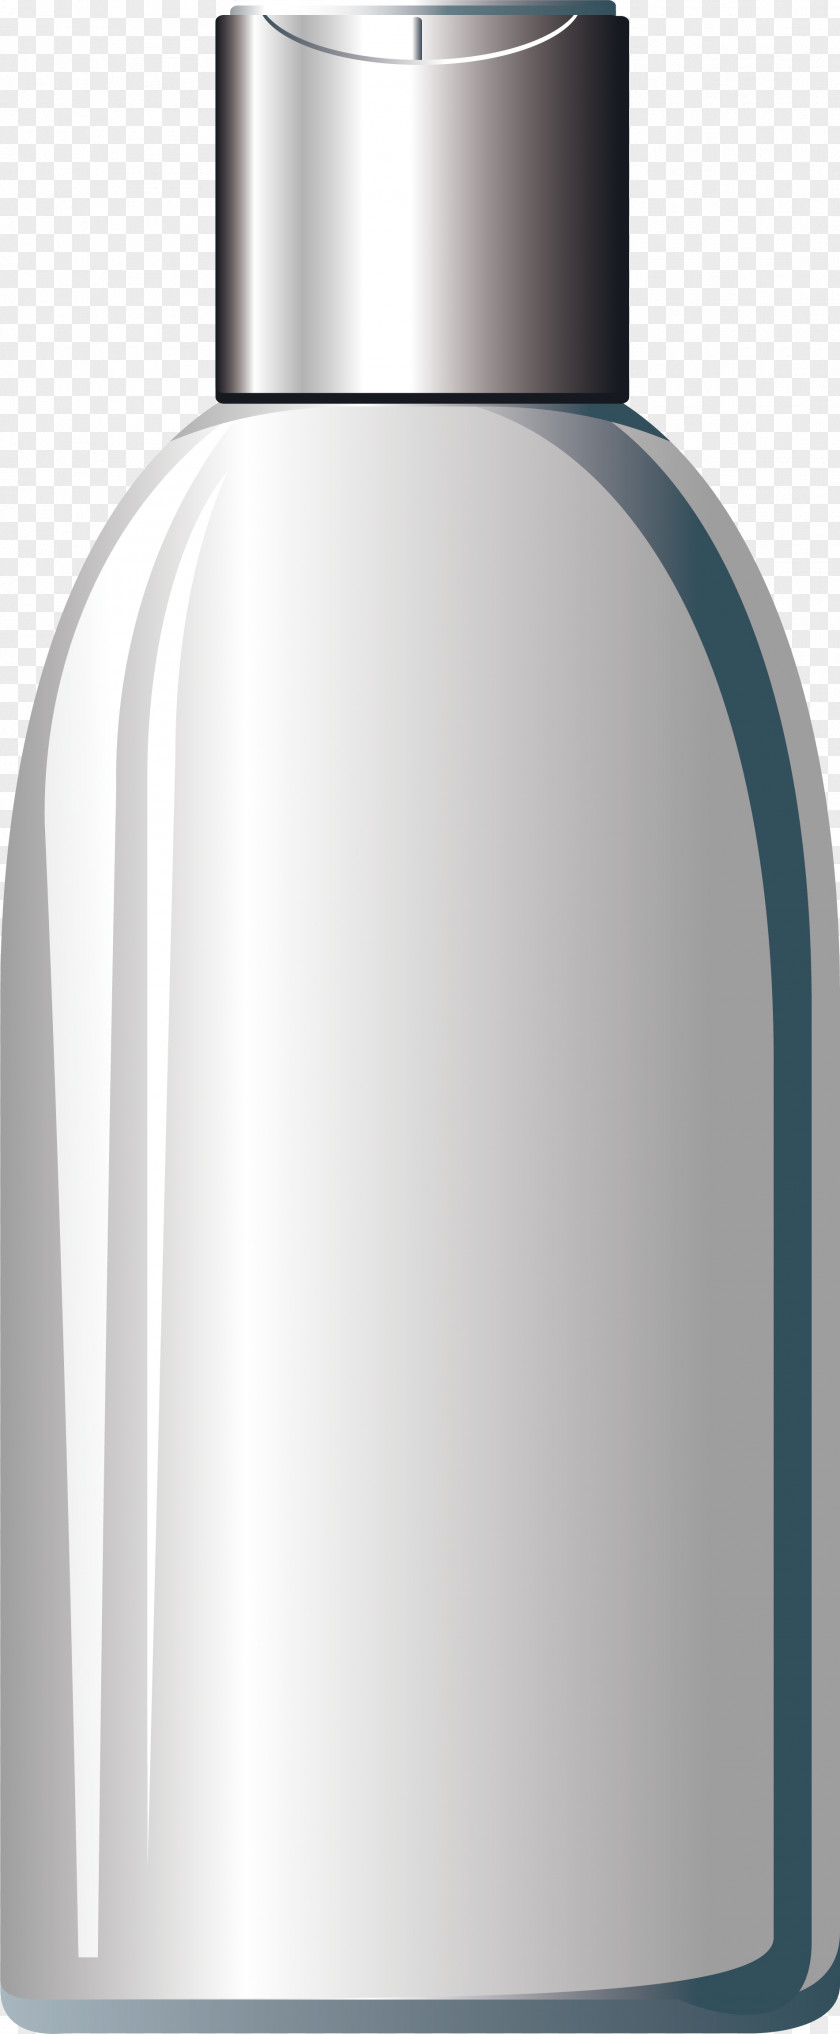 Metal Bottle Glass PNG